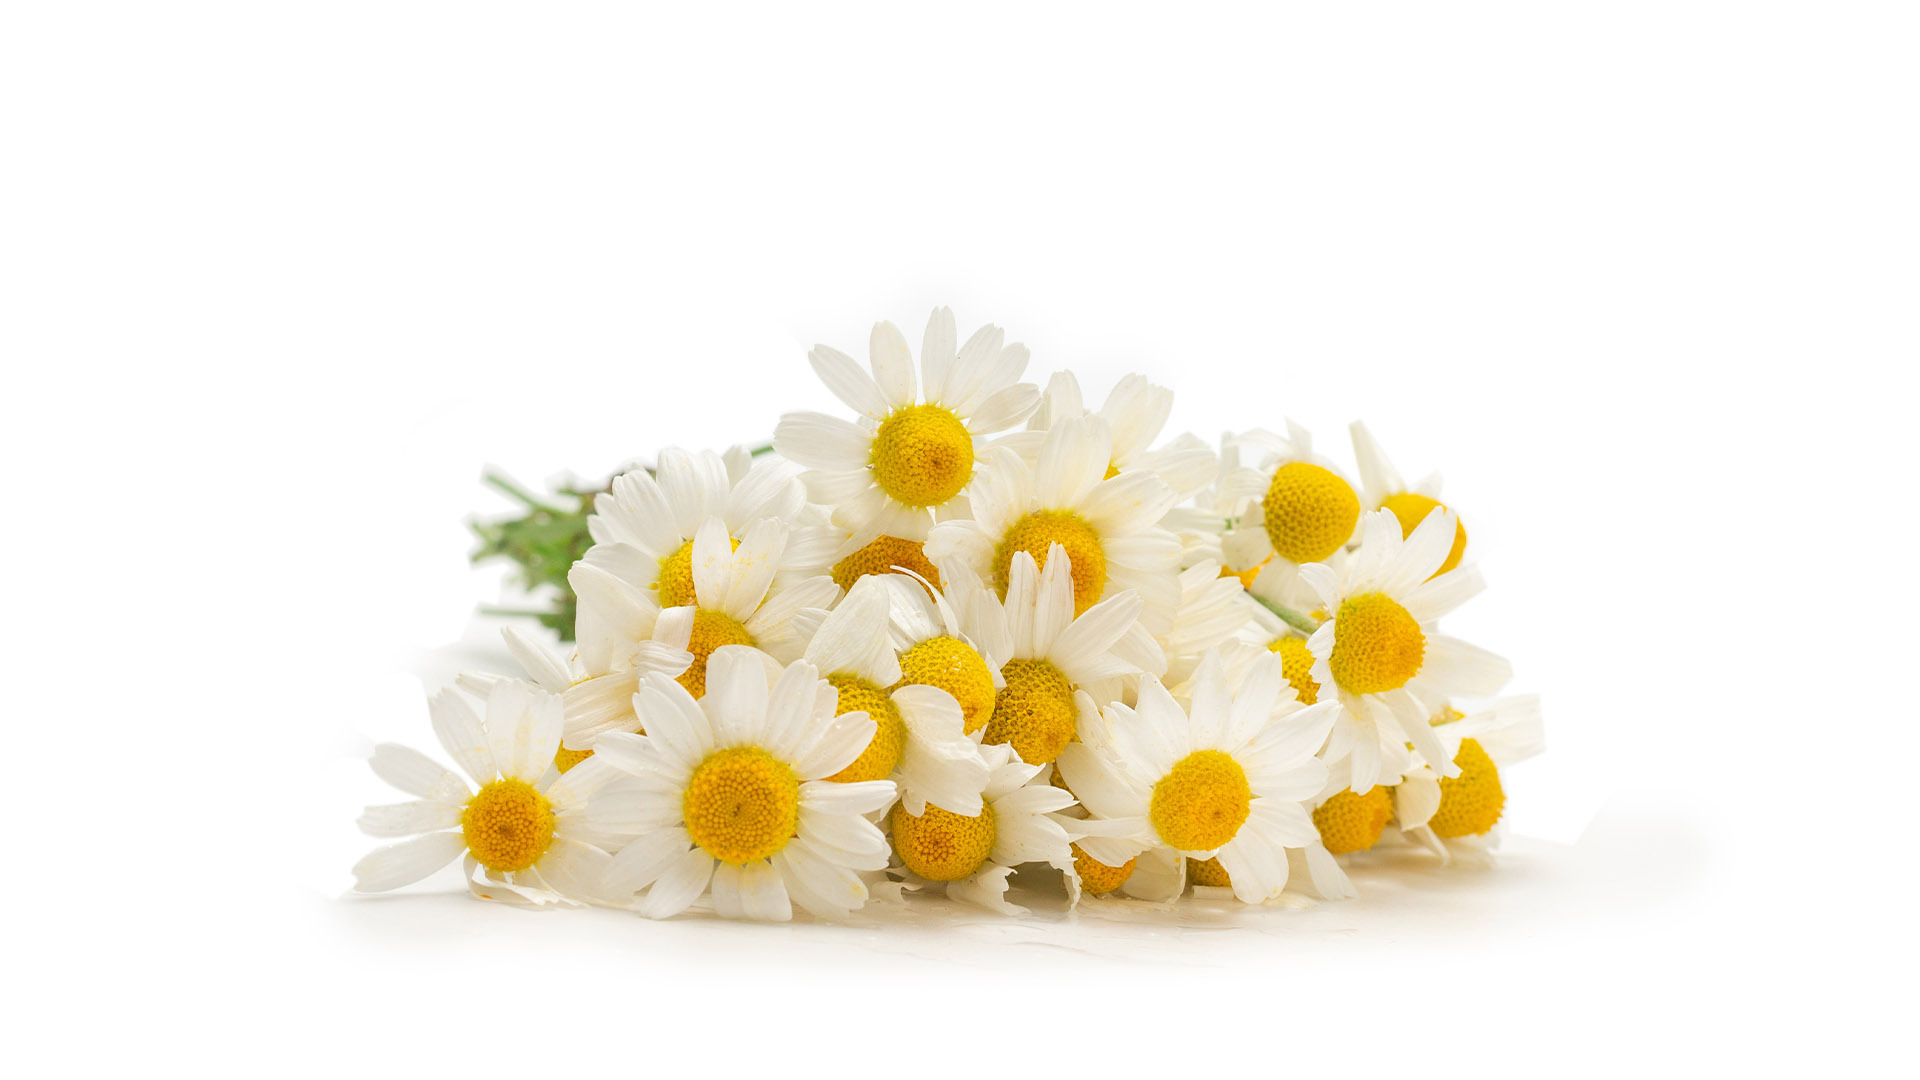 Apart from preparing a cup of Chamomile tea to aid relaxation, this flower can also be used as an anti-inflammatory (MEE)